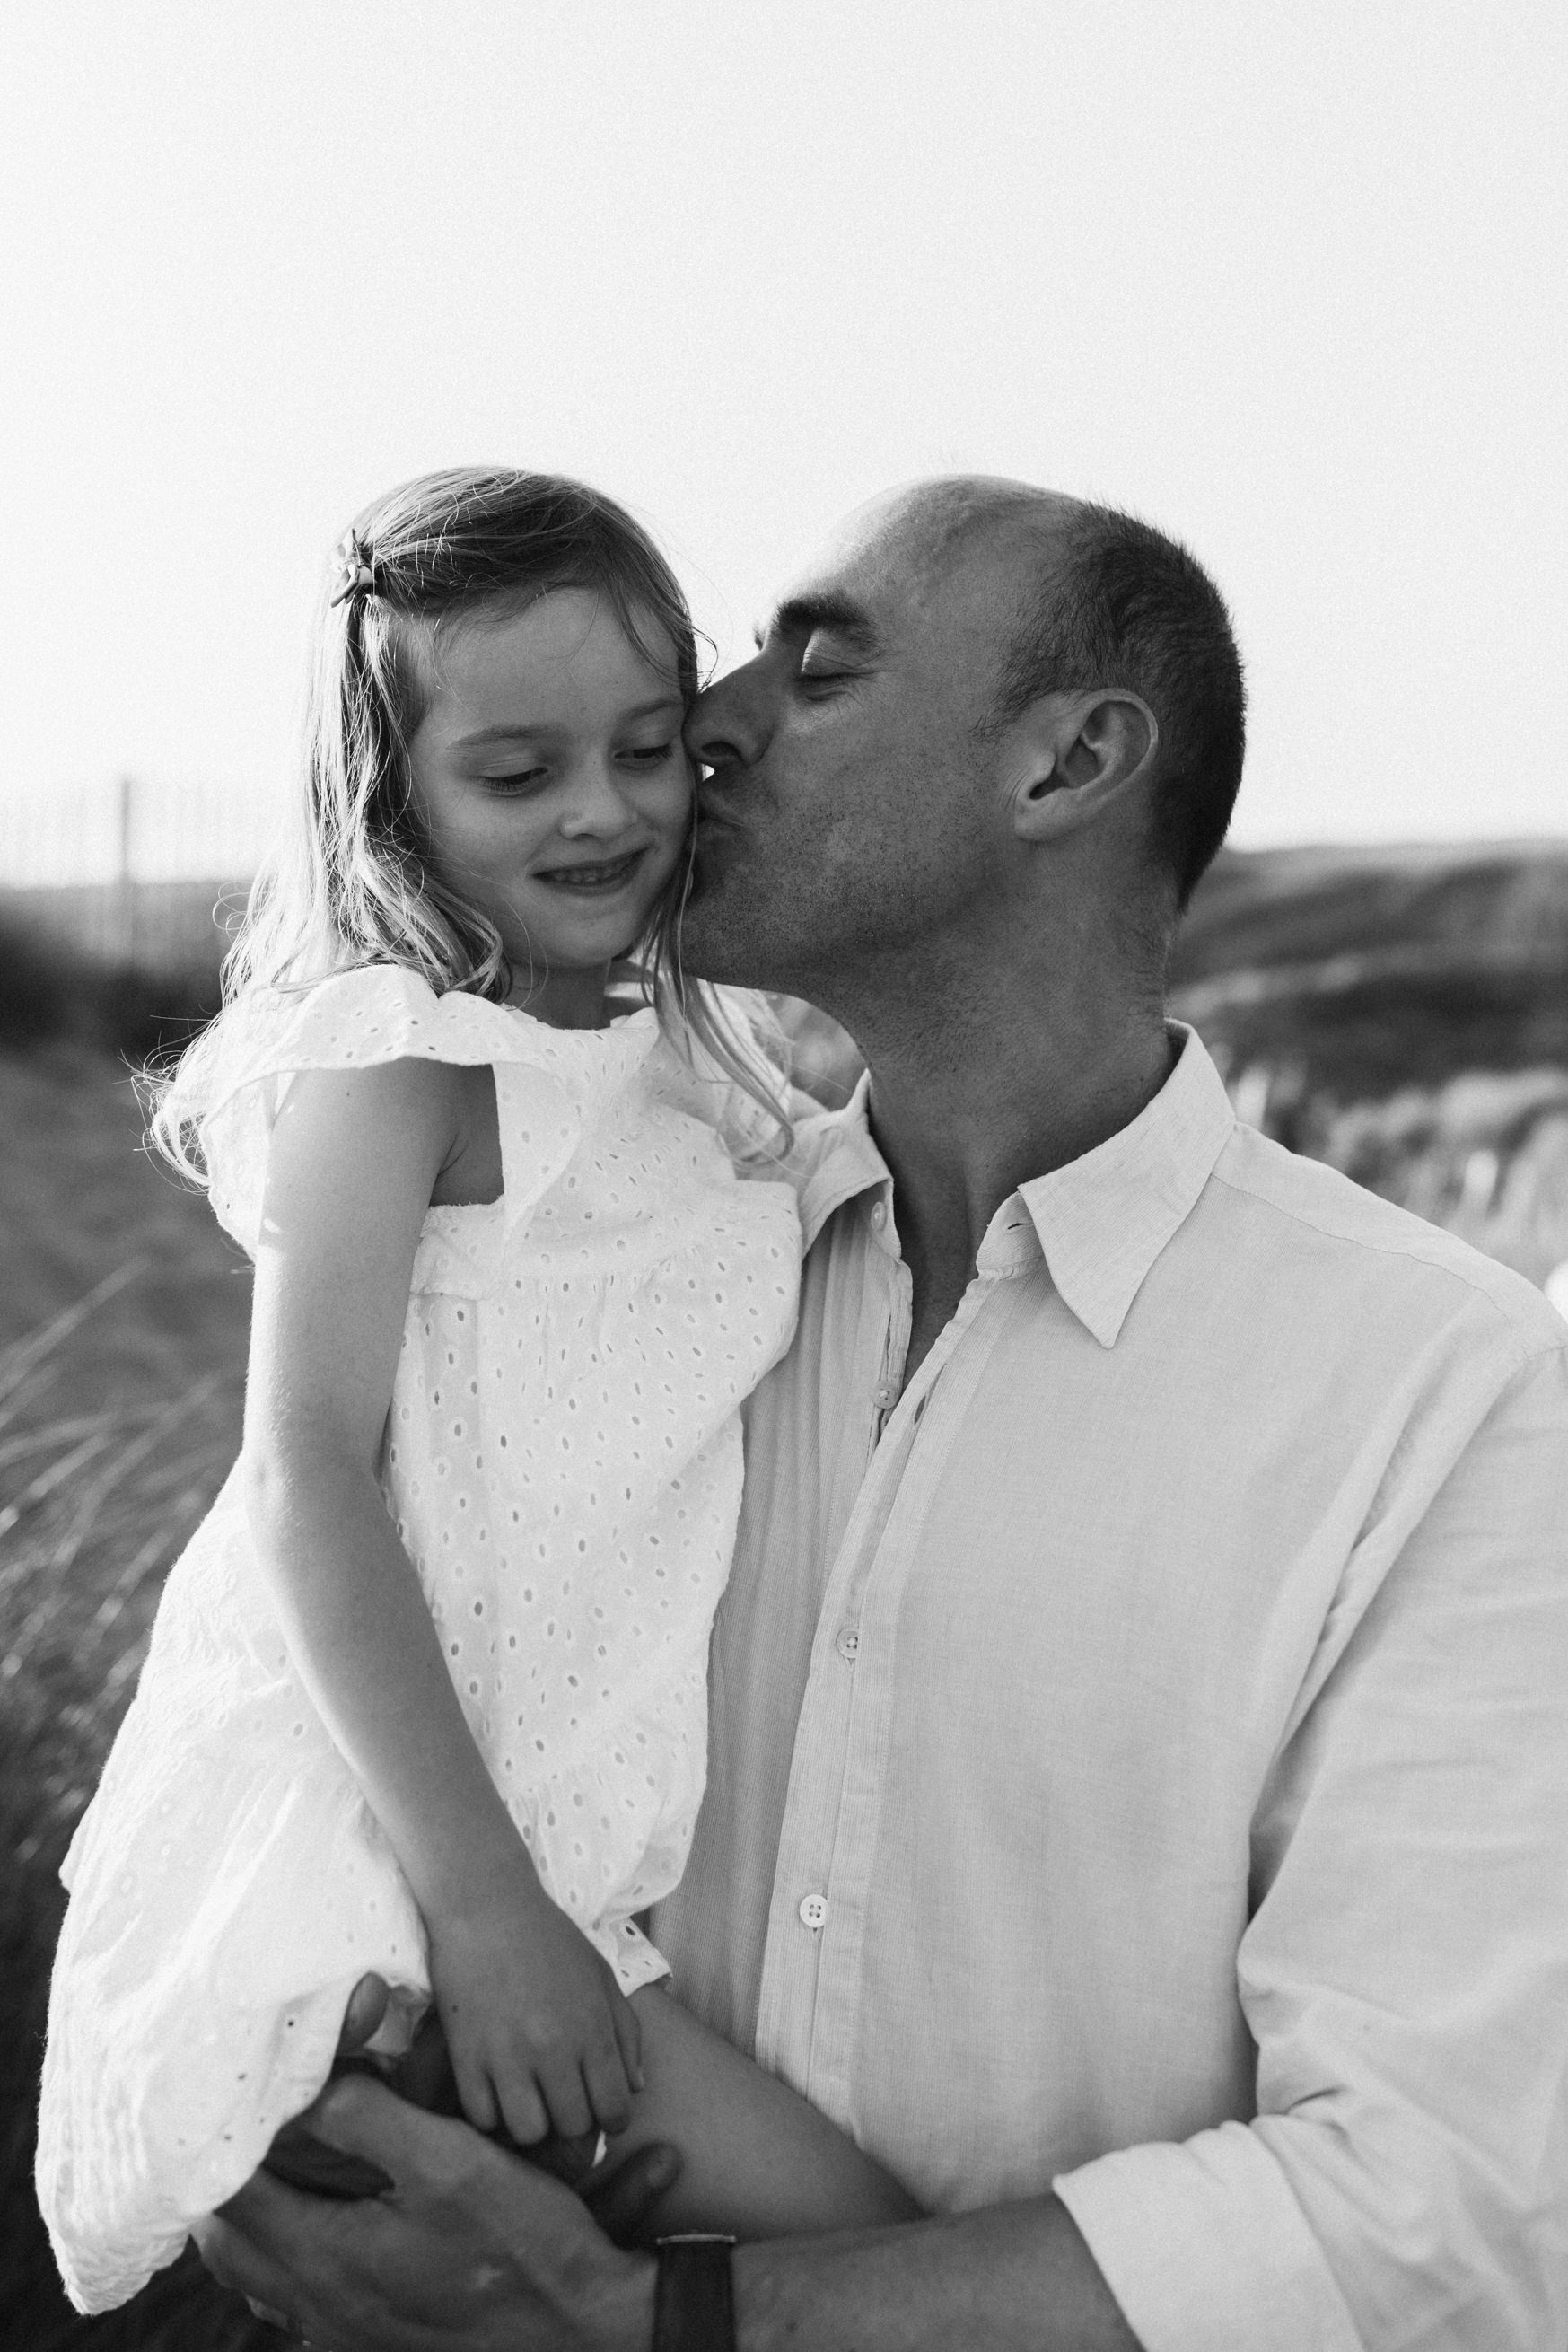 Dad hols little girl and kisses her cheek